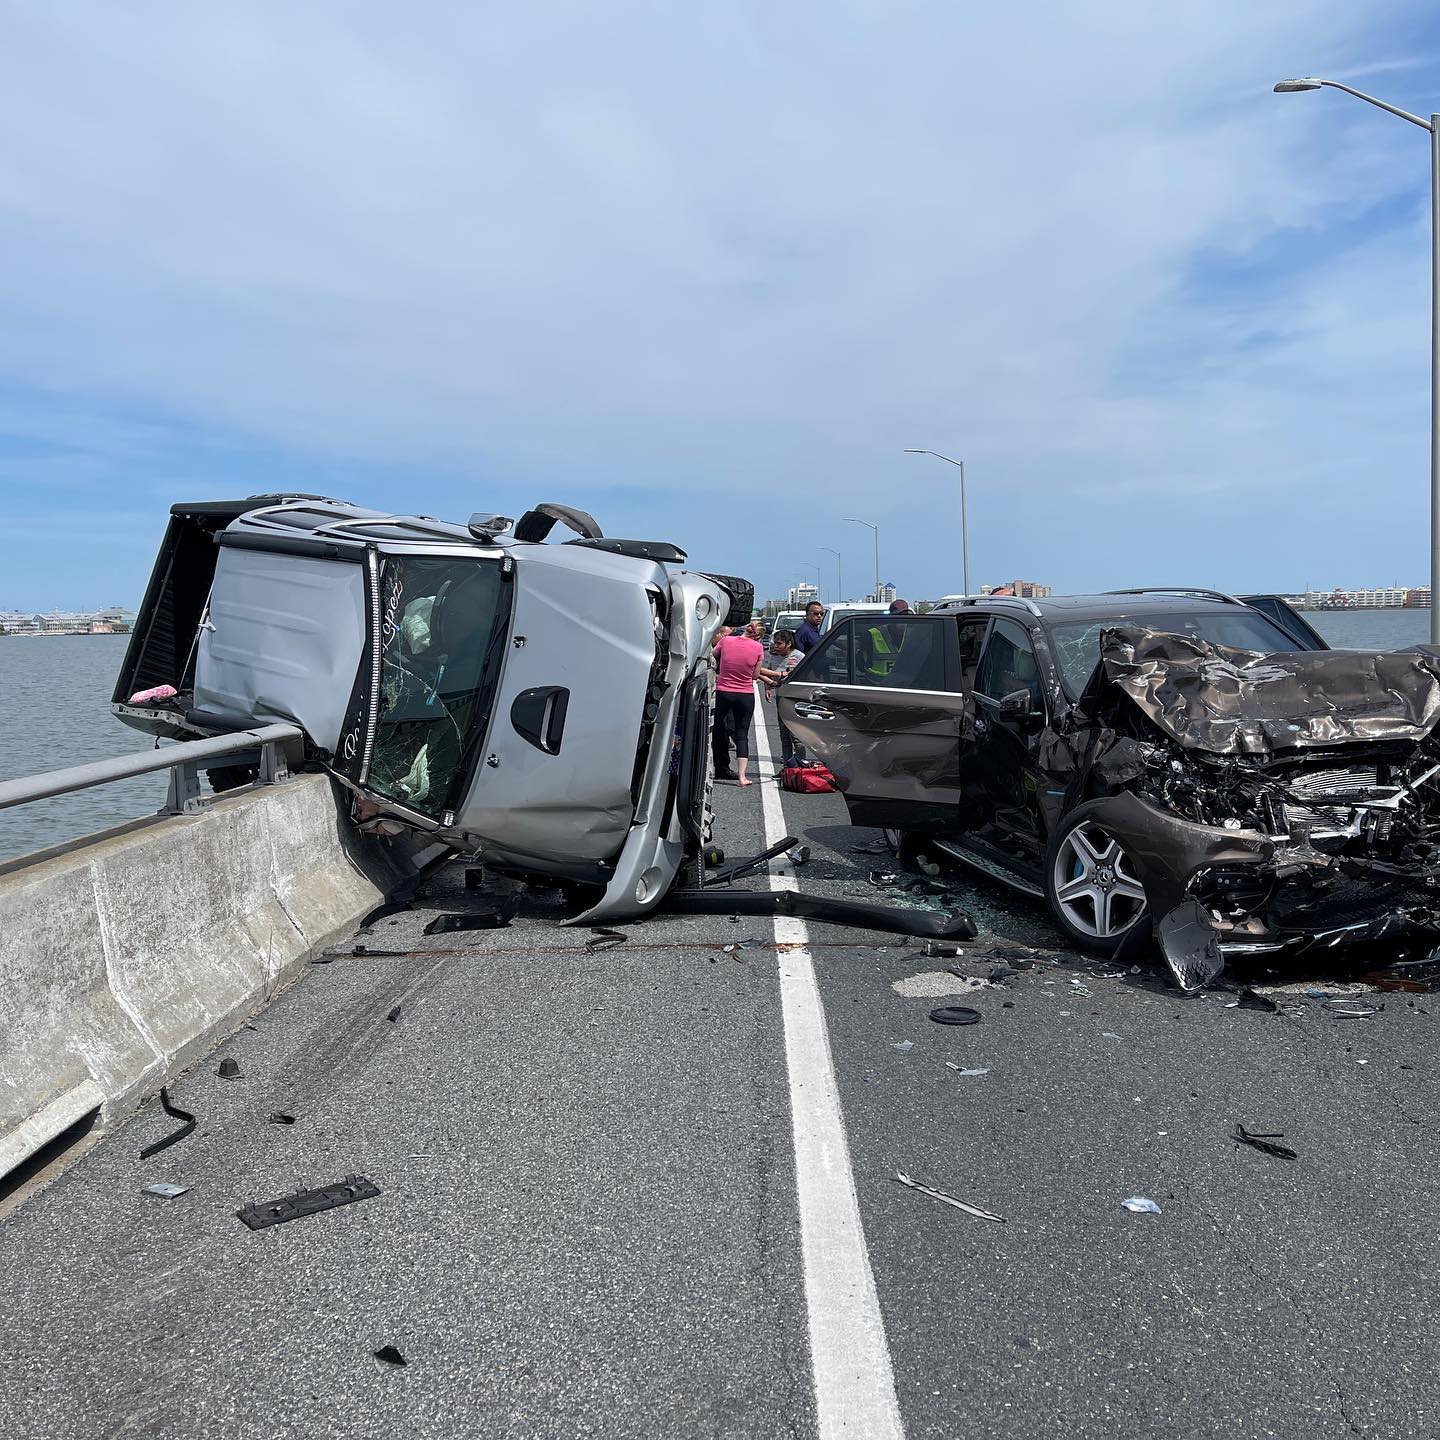 Witness rescues girl from Maryland bay after crash on bridge ABC6